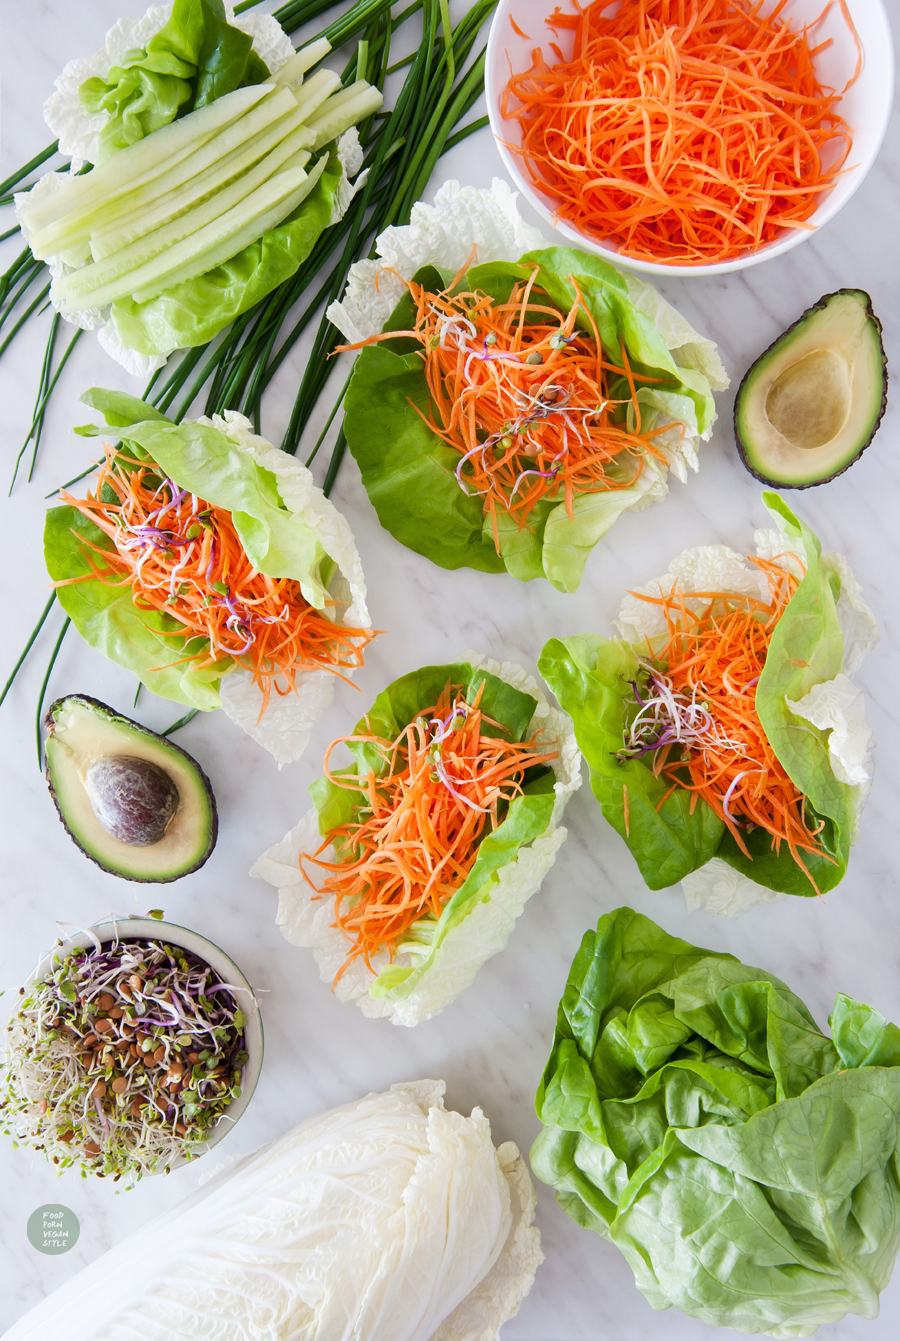 Vegan nappa cabbage spring rolls with carrot "noodles" and simple peanut sauce